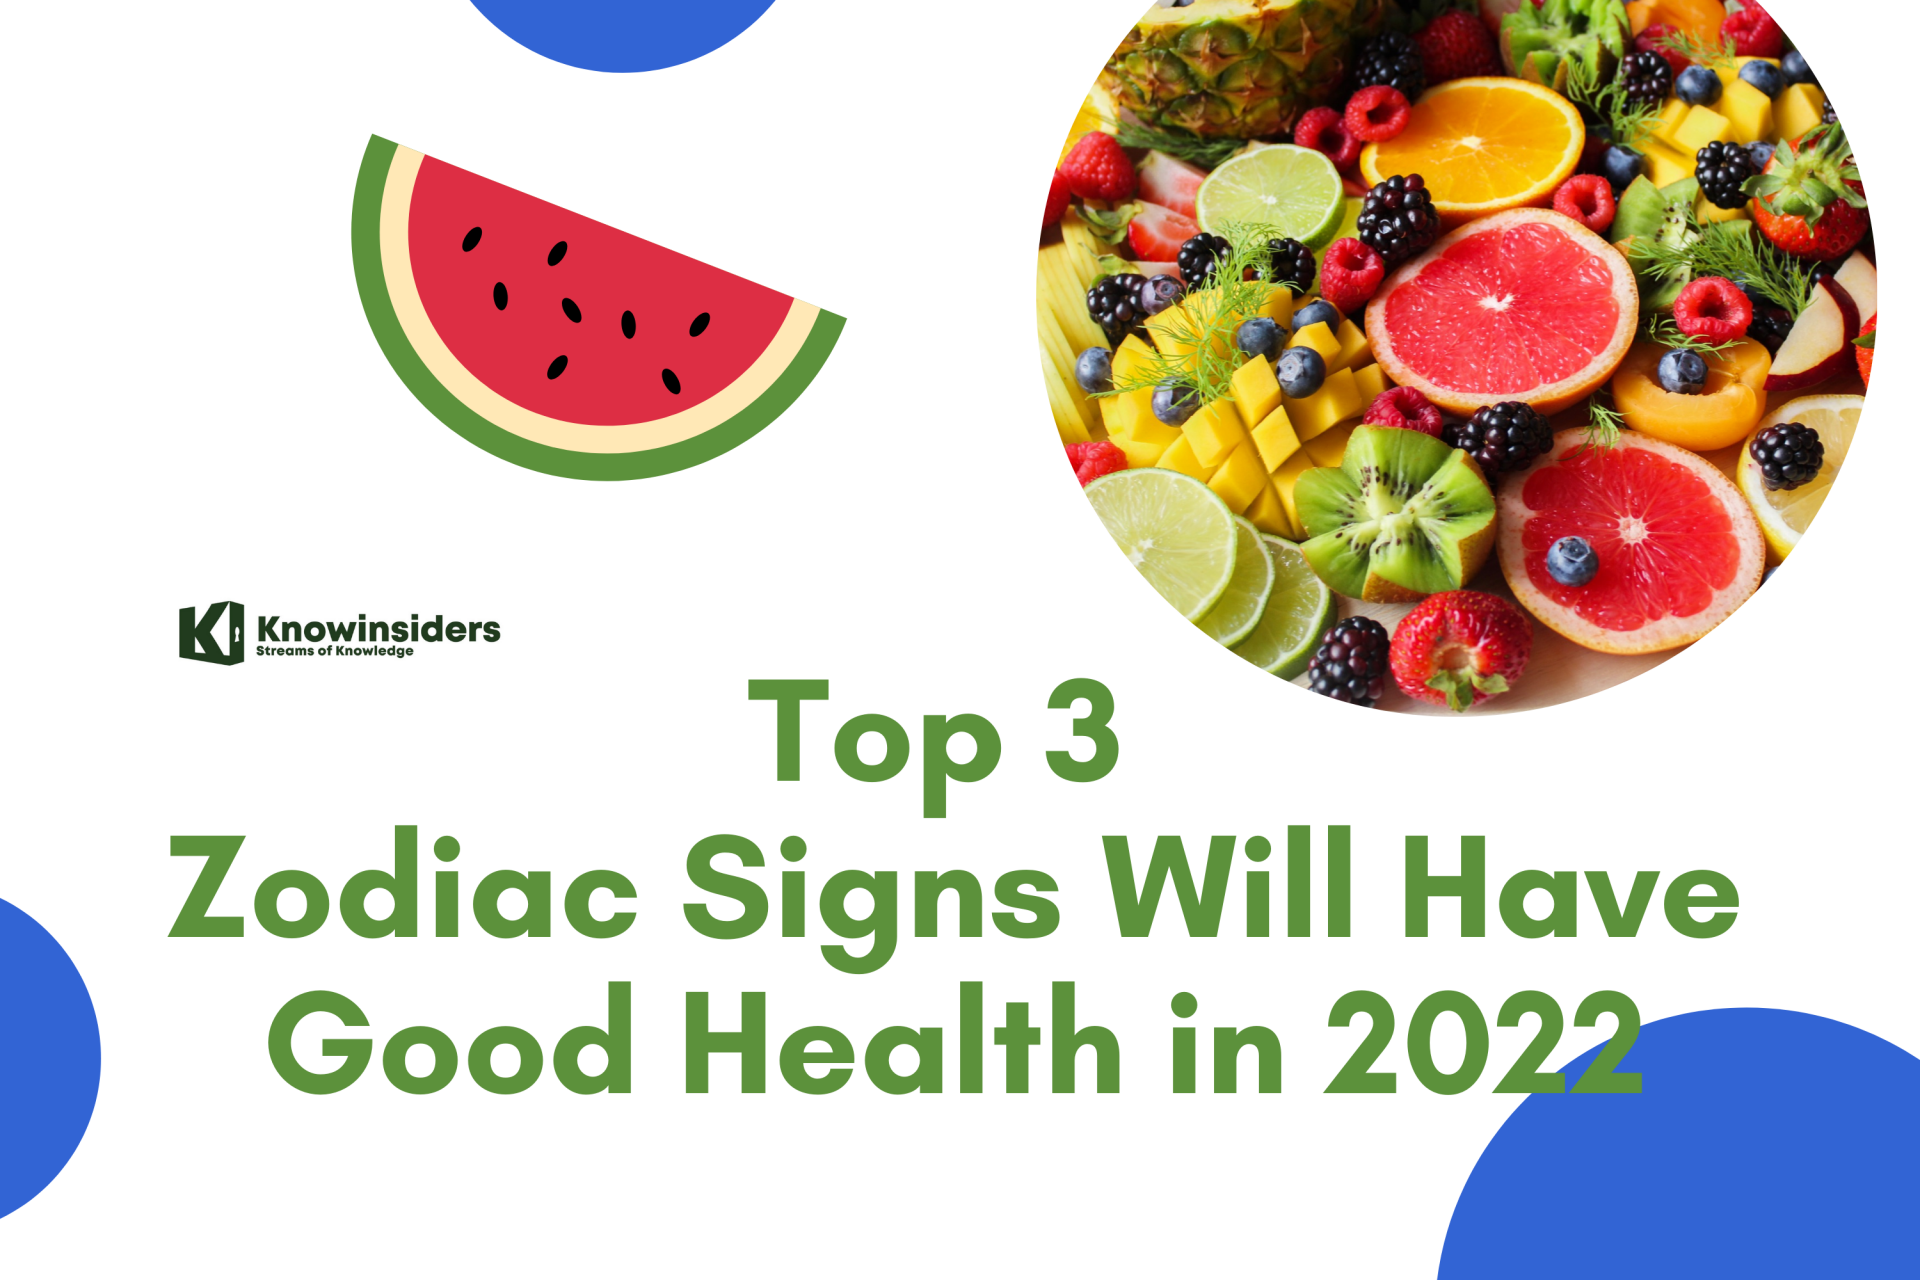 Top 3 Zodiac Signs Will Have Good Health in 2022